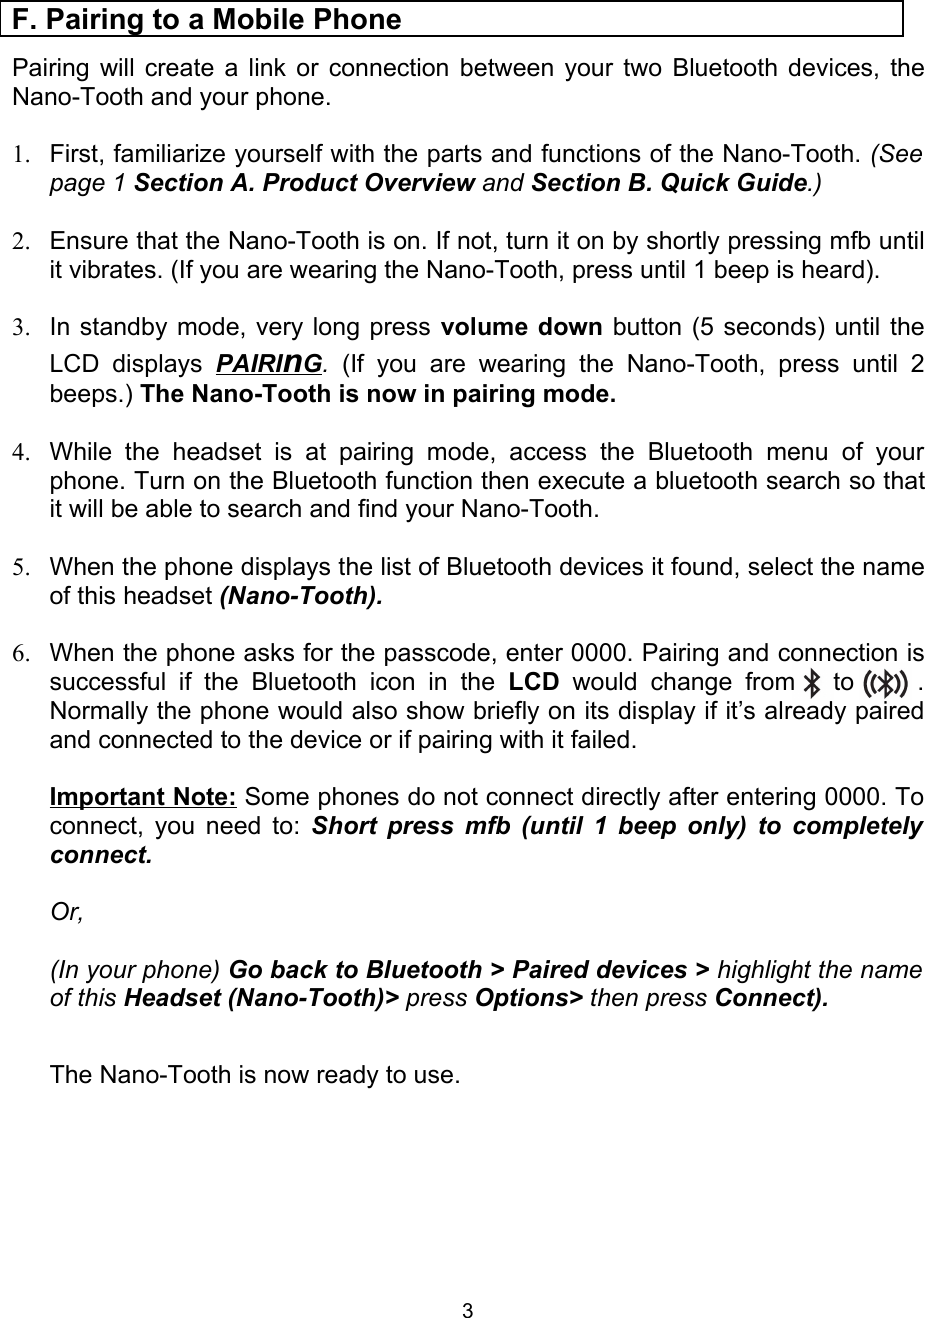 Pairing will create a link or connection between your two Bluetooth devices, the Nano-Tooth and your phone.1. First, familiarize yourself with the parts and functions of the Nano-Tooth. (See page 1 Section A. Product Overview and Section B. Quick Guide.)2. Ensure that the Nano-Tooth is on. If not, turn it on by shortly pressing mfb until it vibrates. (If you are wearing the Nano-Tooth, press until 1 beep is heard). 3. In standby mode, very long press volume down button (5 seconds) until the LCD  displays  PAIRI   n   G   .  (If you  are  wearing   the   Nano-Tooth,   press until 2 beeps.) The Nano-Tooth is now in pairing mode.4. While   the   headset  is  at   pairing  mode,   access   the   Bluetooth   menu   of   your phone. Turn on the Bluetooth function then execute a bluetooth search so that it will be able to search and find your Nano-Tooth. 5. When the phone displays the list of Bluetooth devices it found, select the name of this headset (Nano-Tooth).6. When the phone asks for the passcode, enter 0000. Pairing and connection is successful if the  Bluetooth  icon  in the  LCD  would  change   from       to          . Normally the phone would also show briefly on its display if it’s already paired and connected to the device or if pairing with it failed.Important Note: Some phones do not connect directly after entering 0000. To connect, you need to: Short press mfb (until 1 beep only) to completely  connect. Or,(In your phone) Go back to Bluetooth &gt; Paired devices &gt; highlight the name of this Headset (Nano-Tooth)&gt; press Options&gt; then press Connect).              The Nano-Tooth is now ready to use.F. Pairing to a Mobile Phone3